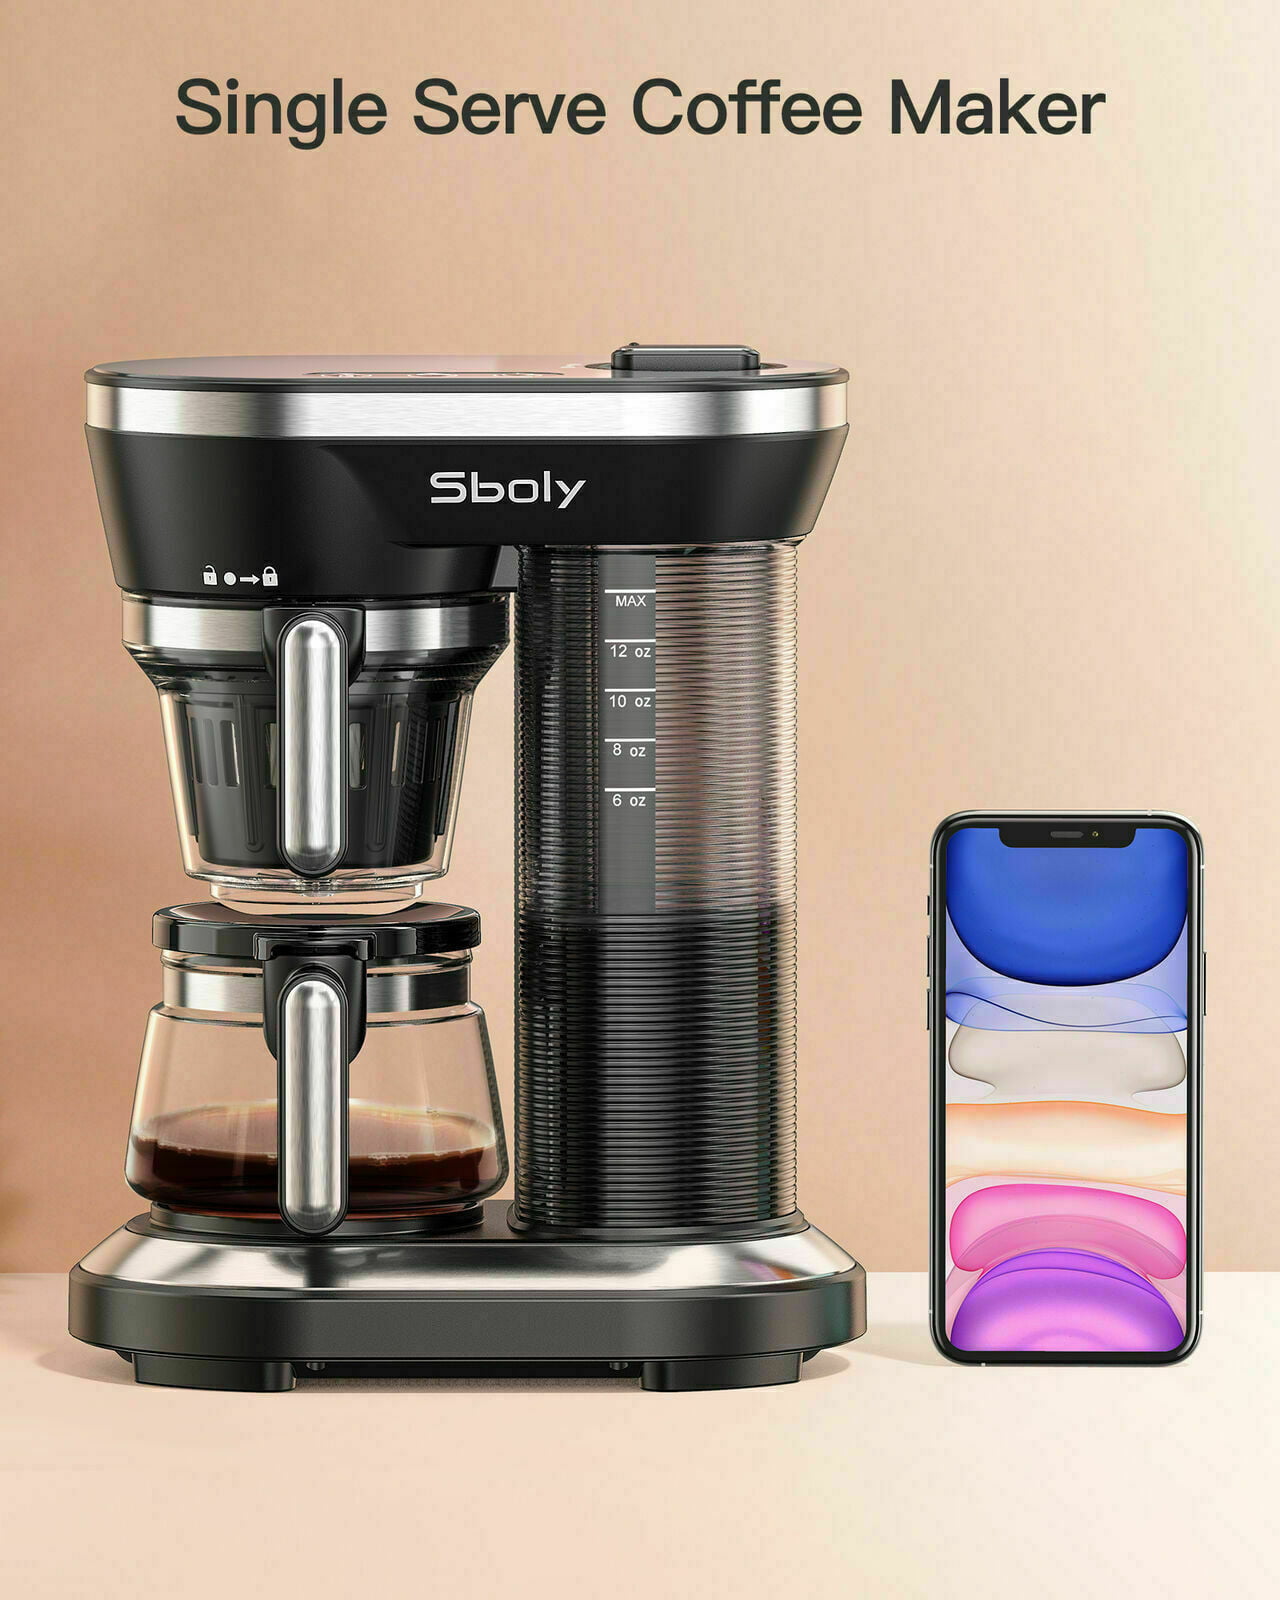 boly Single Serve Coffee Maker Machine, Grind and Brew 2 in 1 Coffee Maker  with 16oz Stainless Steel Travel Mug, Adjustable Tray, Dual Brewing Options